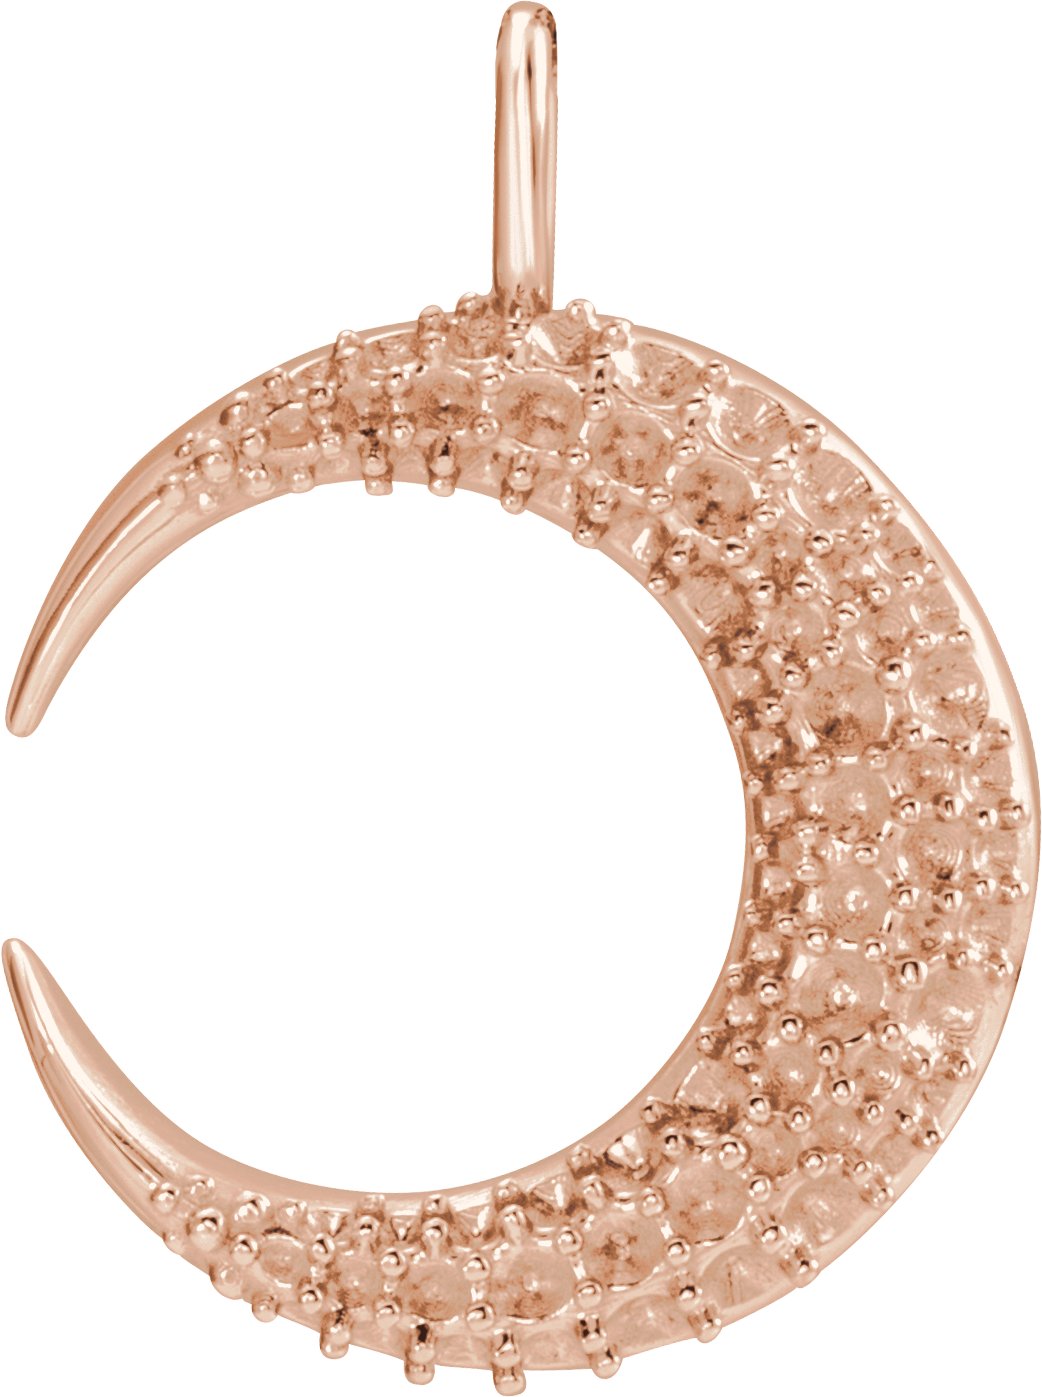 14K Rose Accented Crescent Moon Pendant Mounting